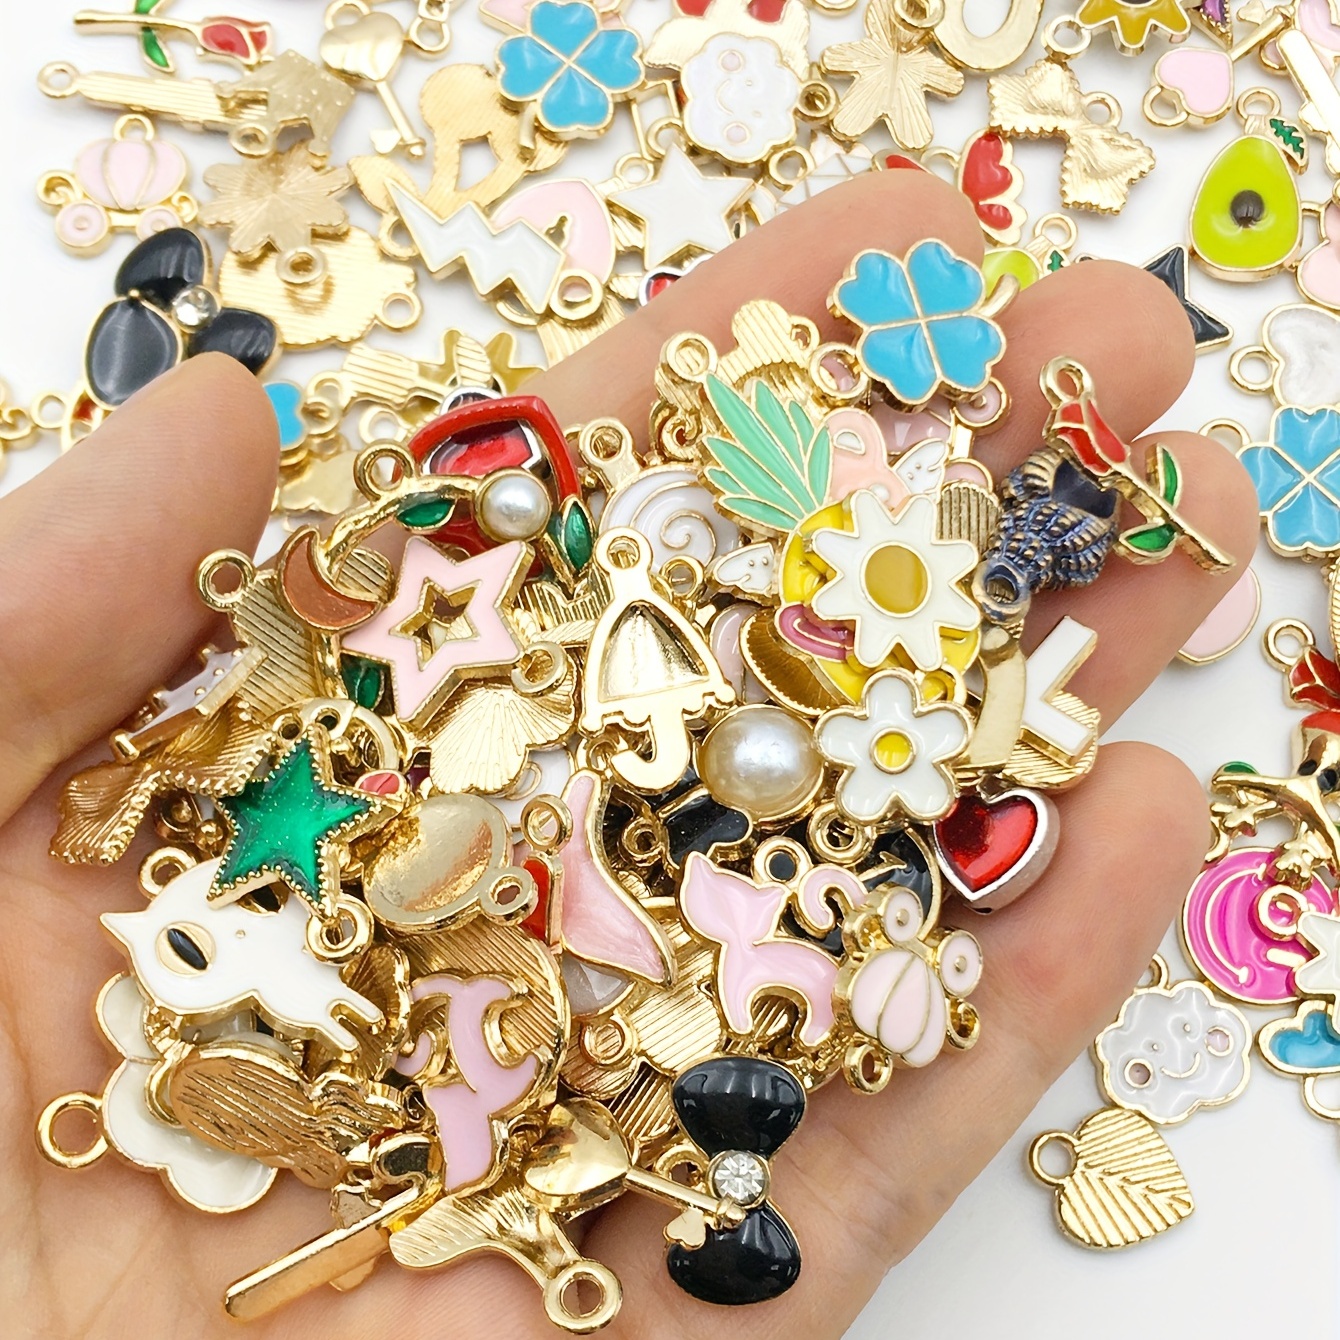 50pcs Bulk Jewelry Making Charms - Gold Plated Enamel Pendants for DIY  Necklace, Bracelet & Earring Crafts